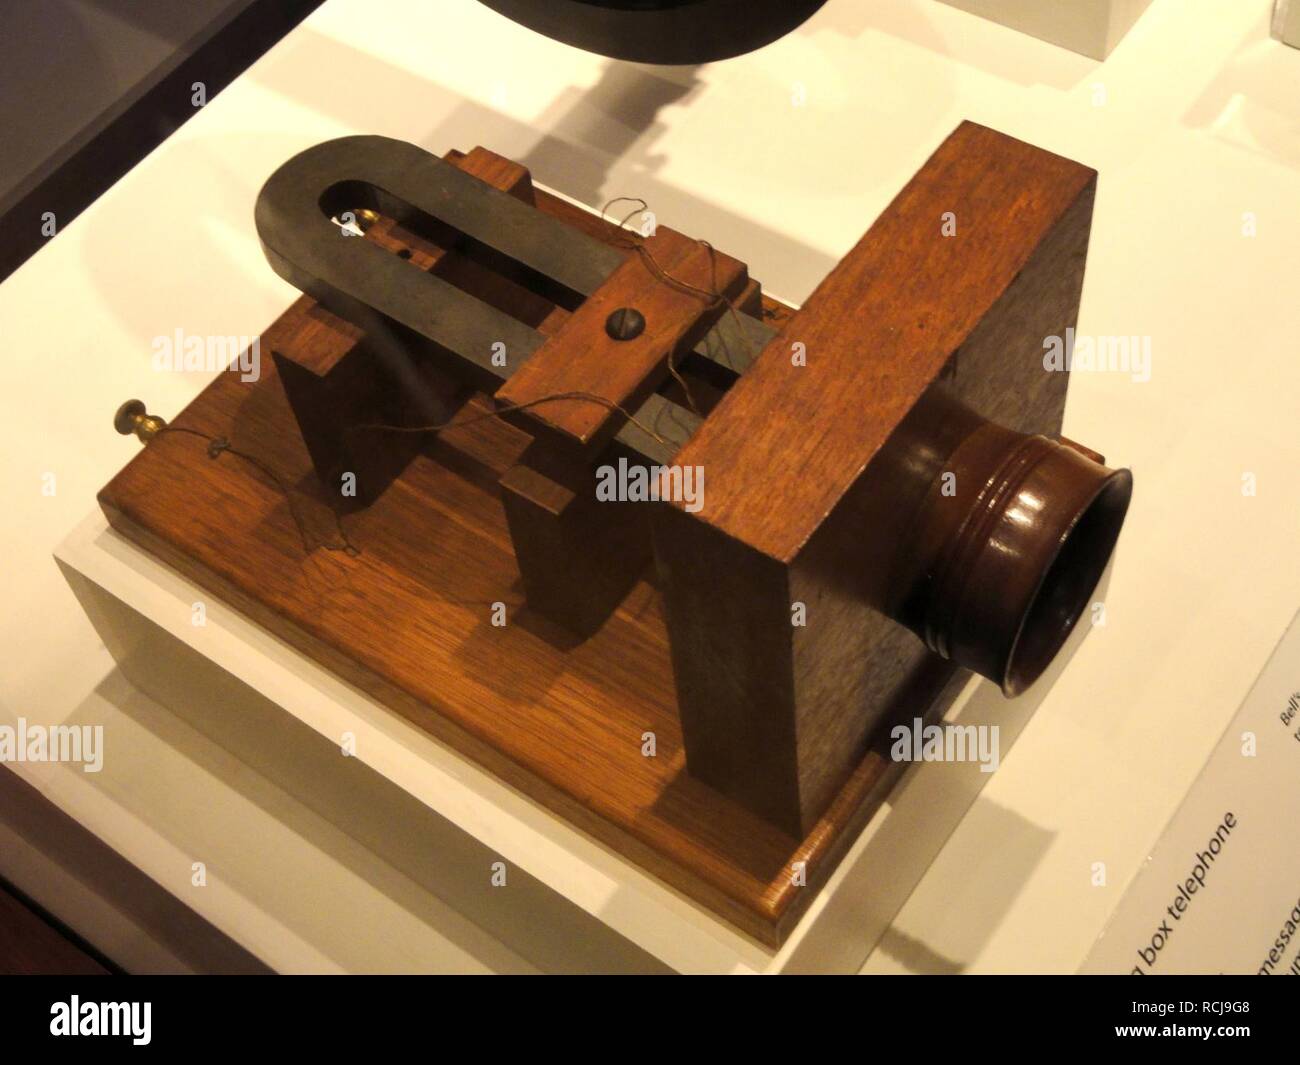 Alexander Graham Bell's big box telephone, 1876, one of the first commercially available telephones - National Stock Photo